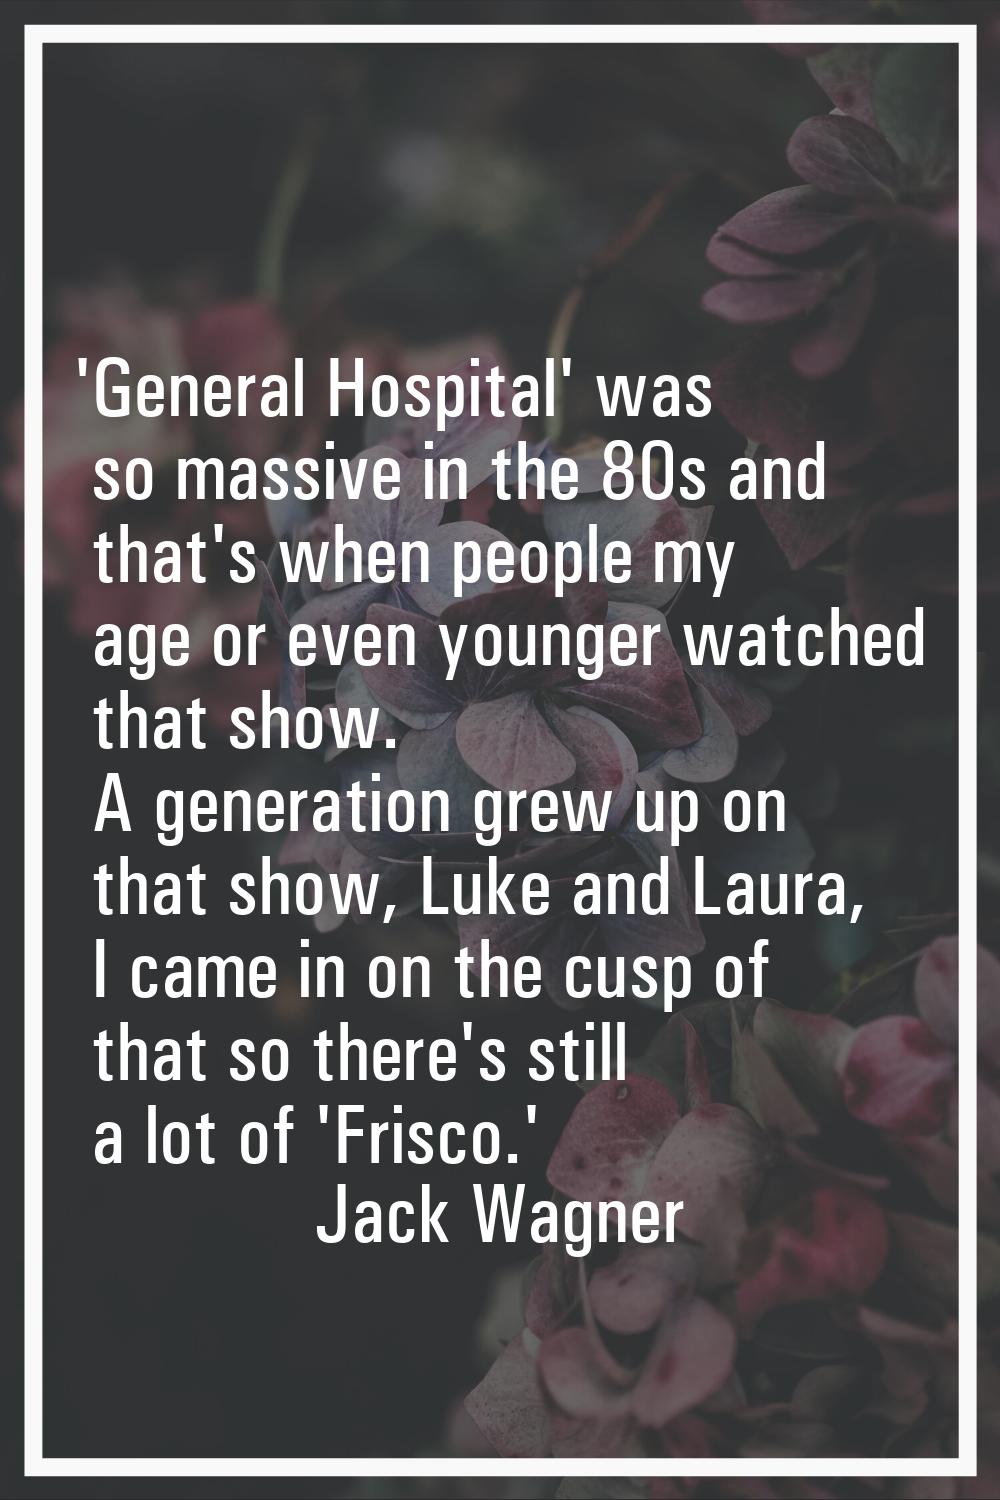 'General Hospital' was so massive in the 80s and that's when people my age or even younger watched 